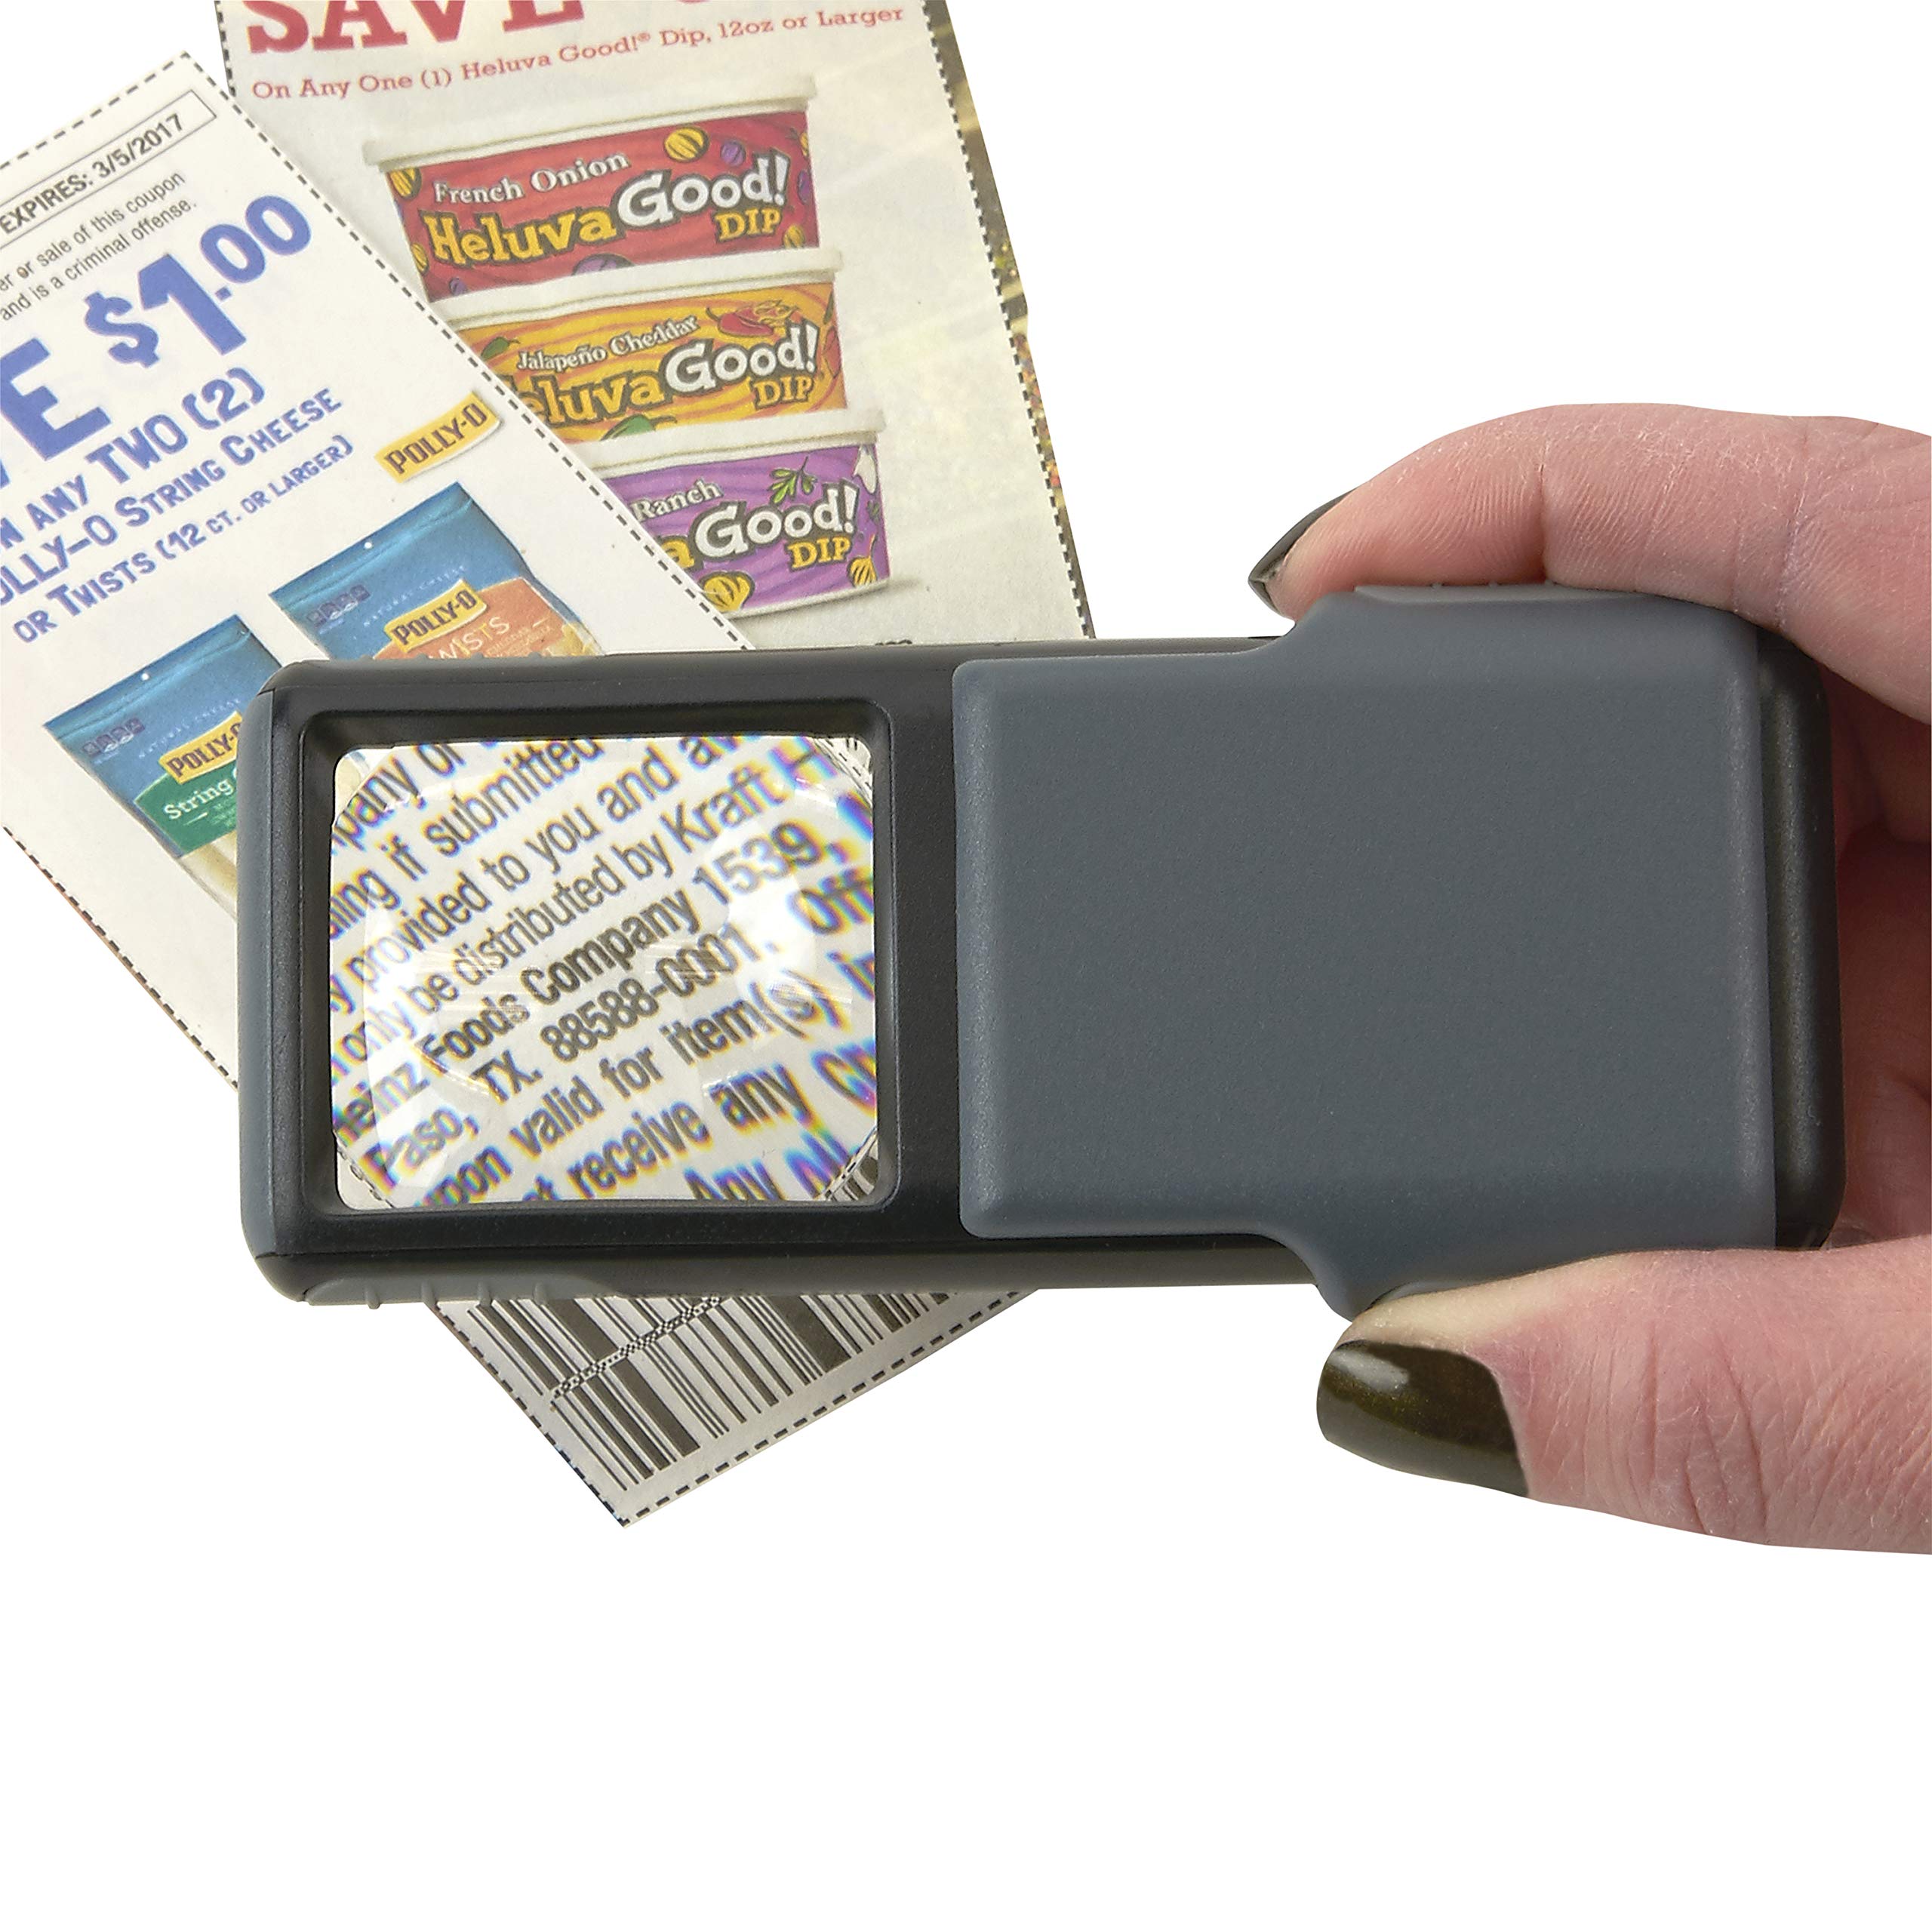 Carson 5x MiniBrite LED Lighted Slide-Out Aspheric Magnifier with Protective Sleeve - Set of 4 (PO-55MU),Gray